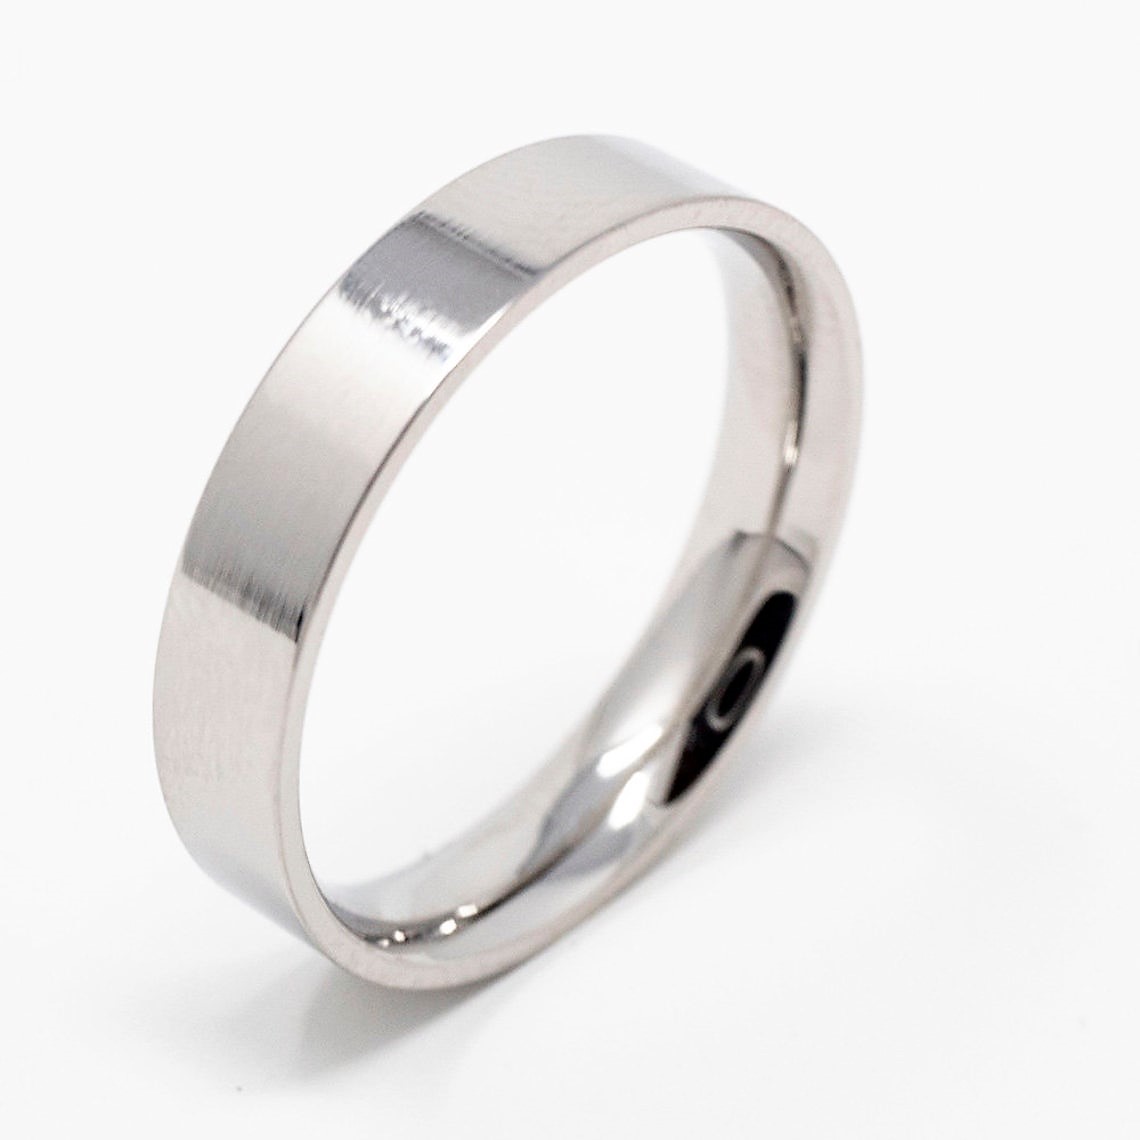 4mm Stainless Steel ring liner / core, comfort fit - Jewellery Findings ...